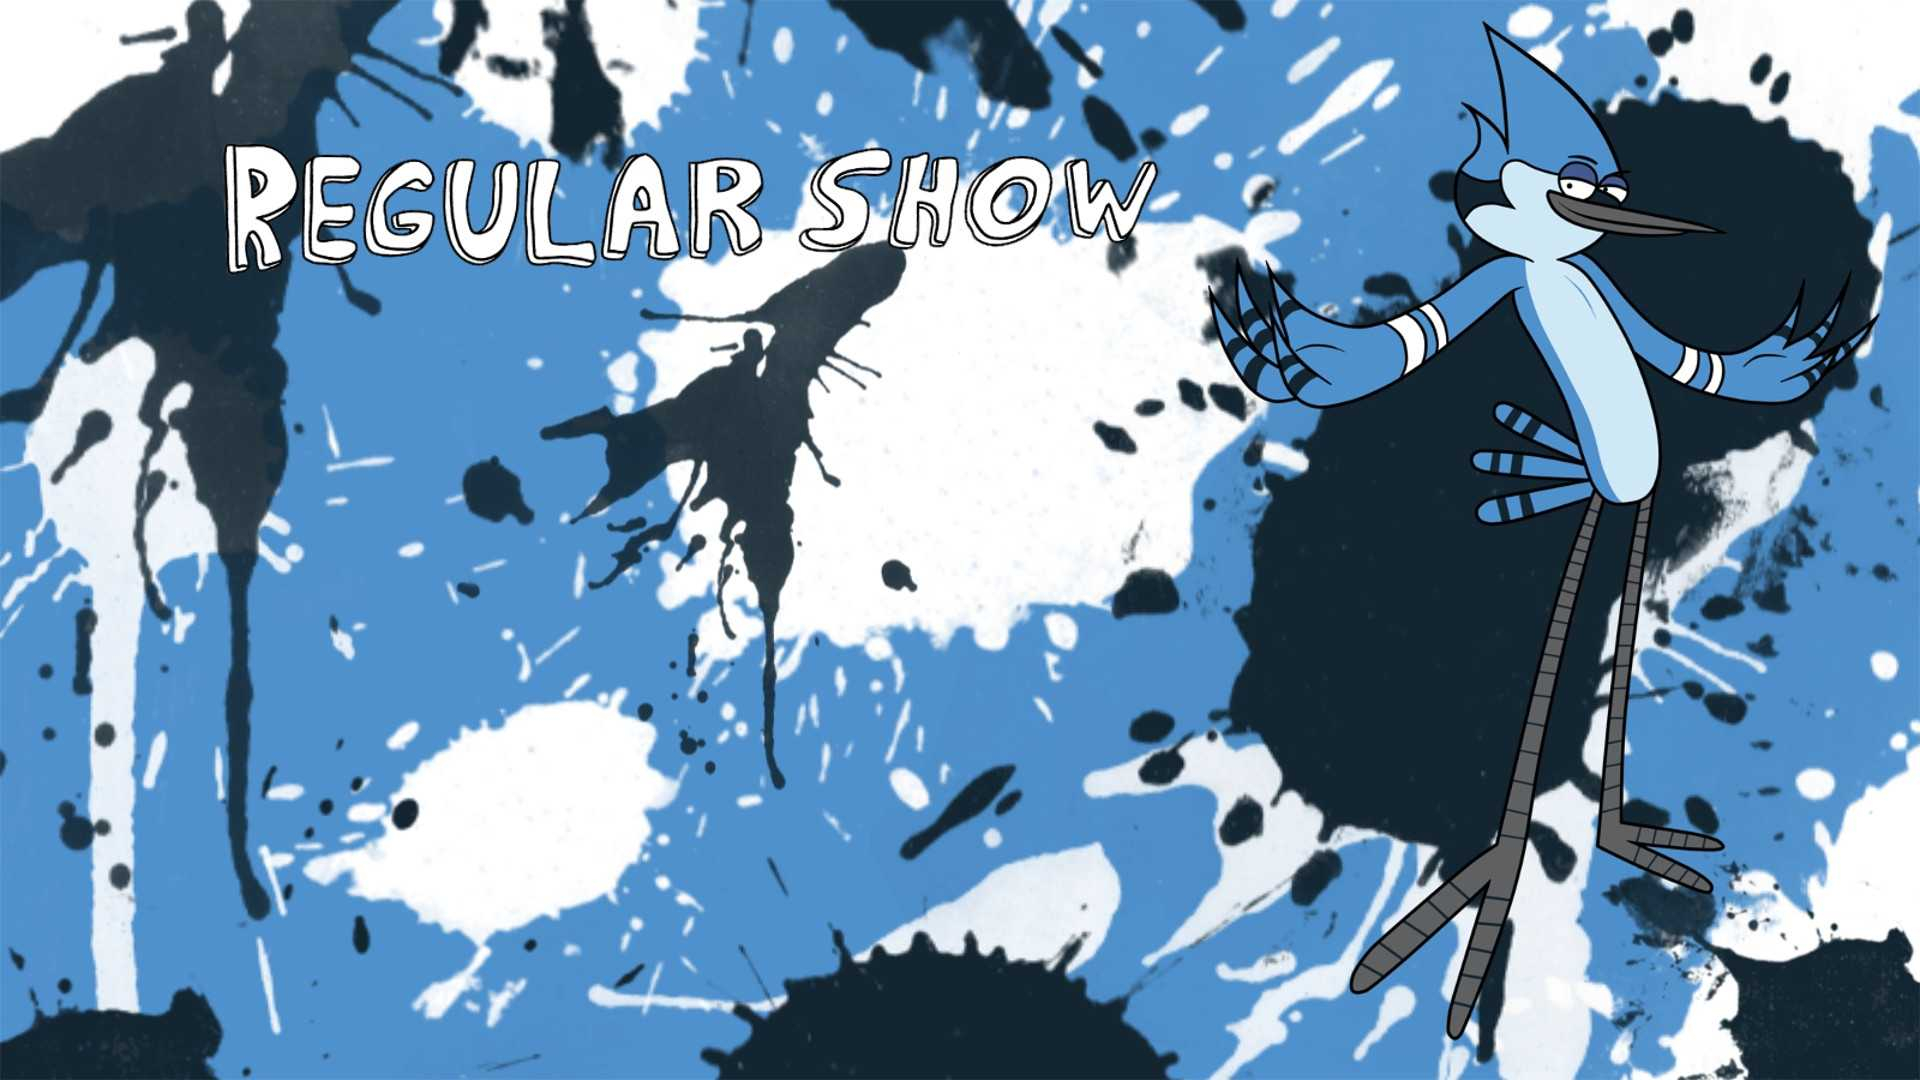 1920x1080 Regular Show Wallpaper HD Awesome Free HD Wallpapers